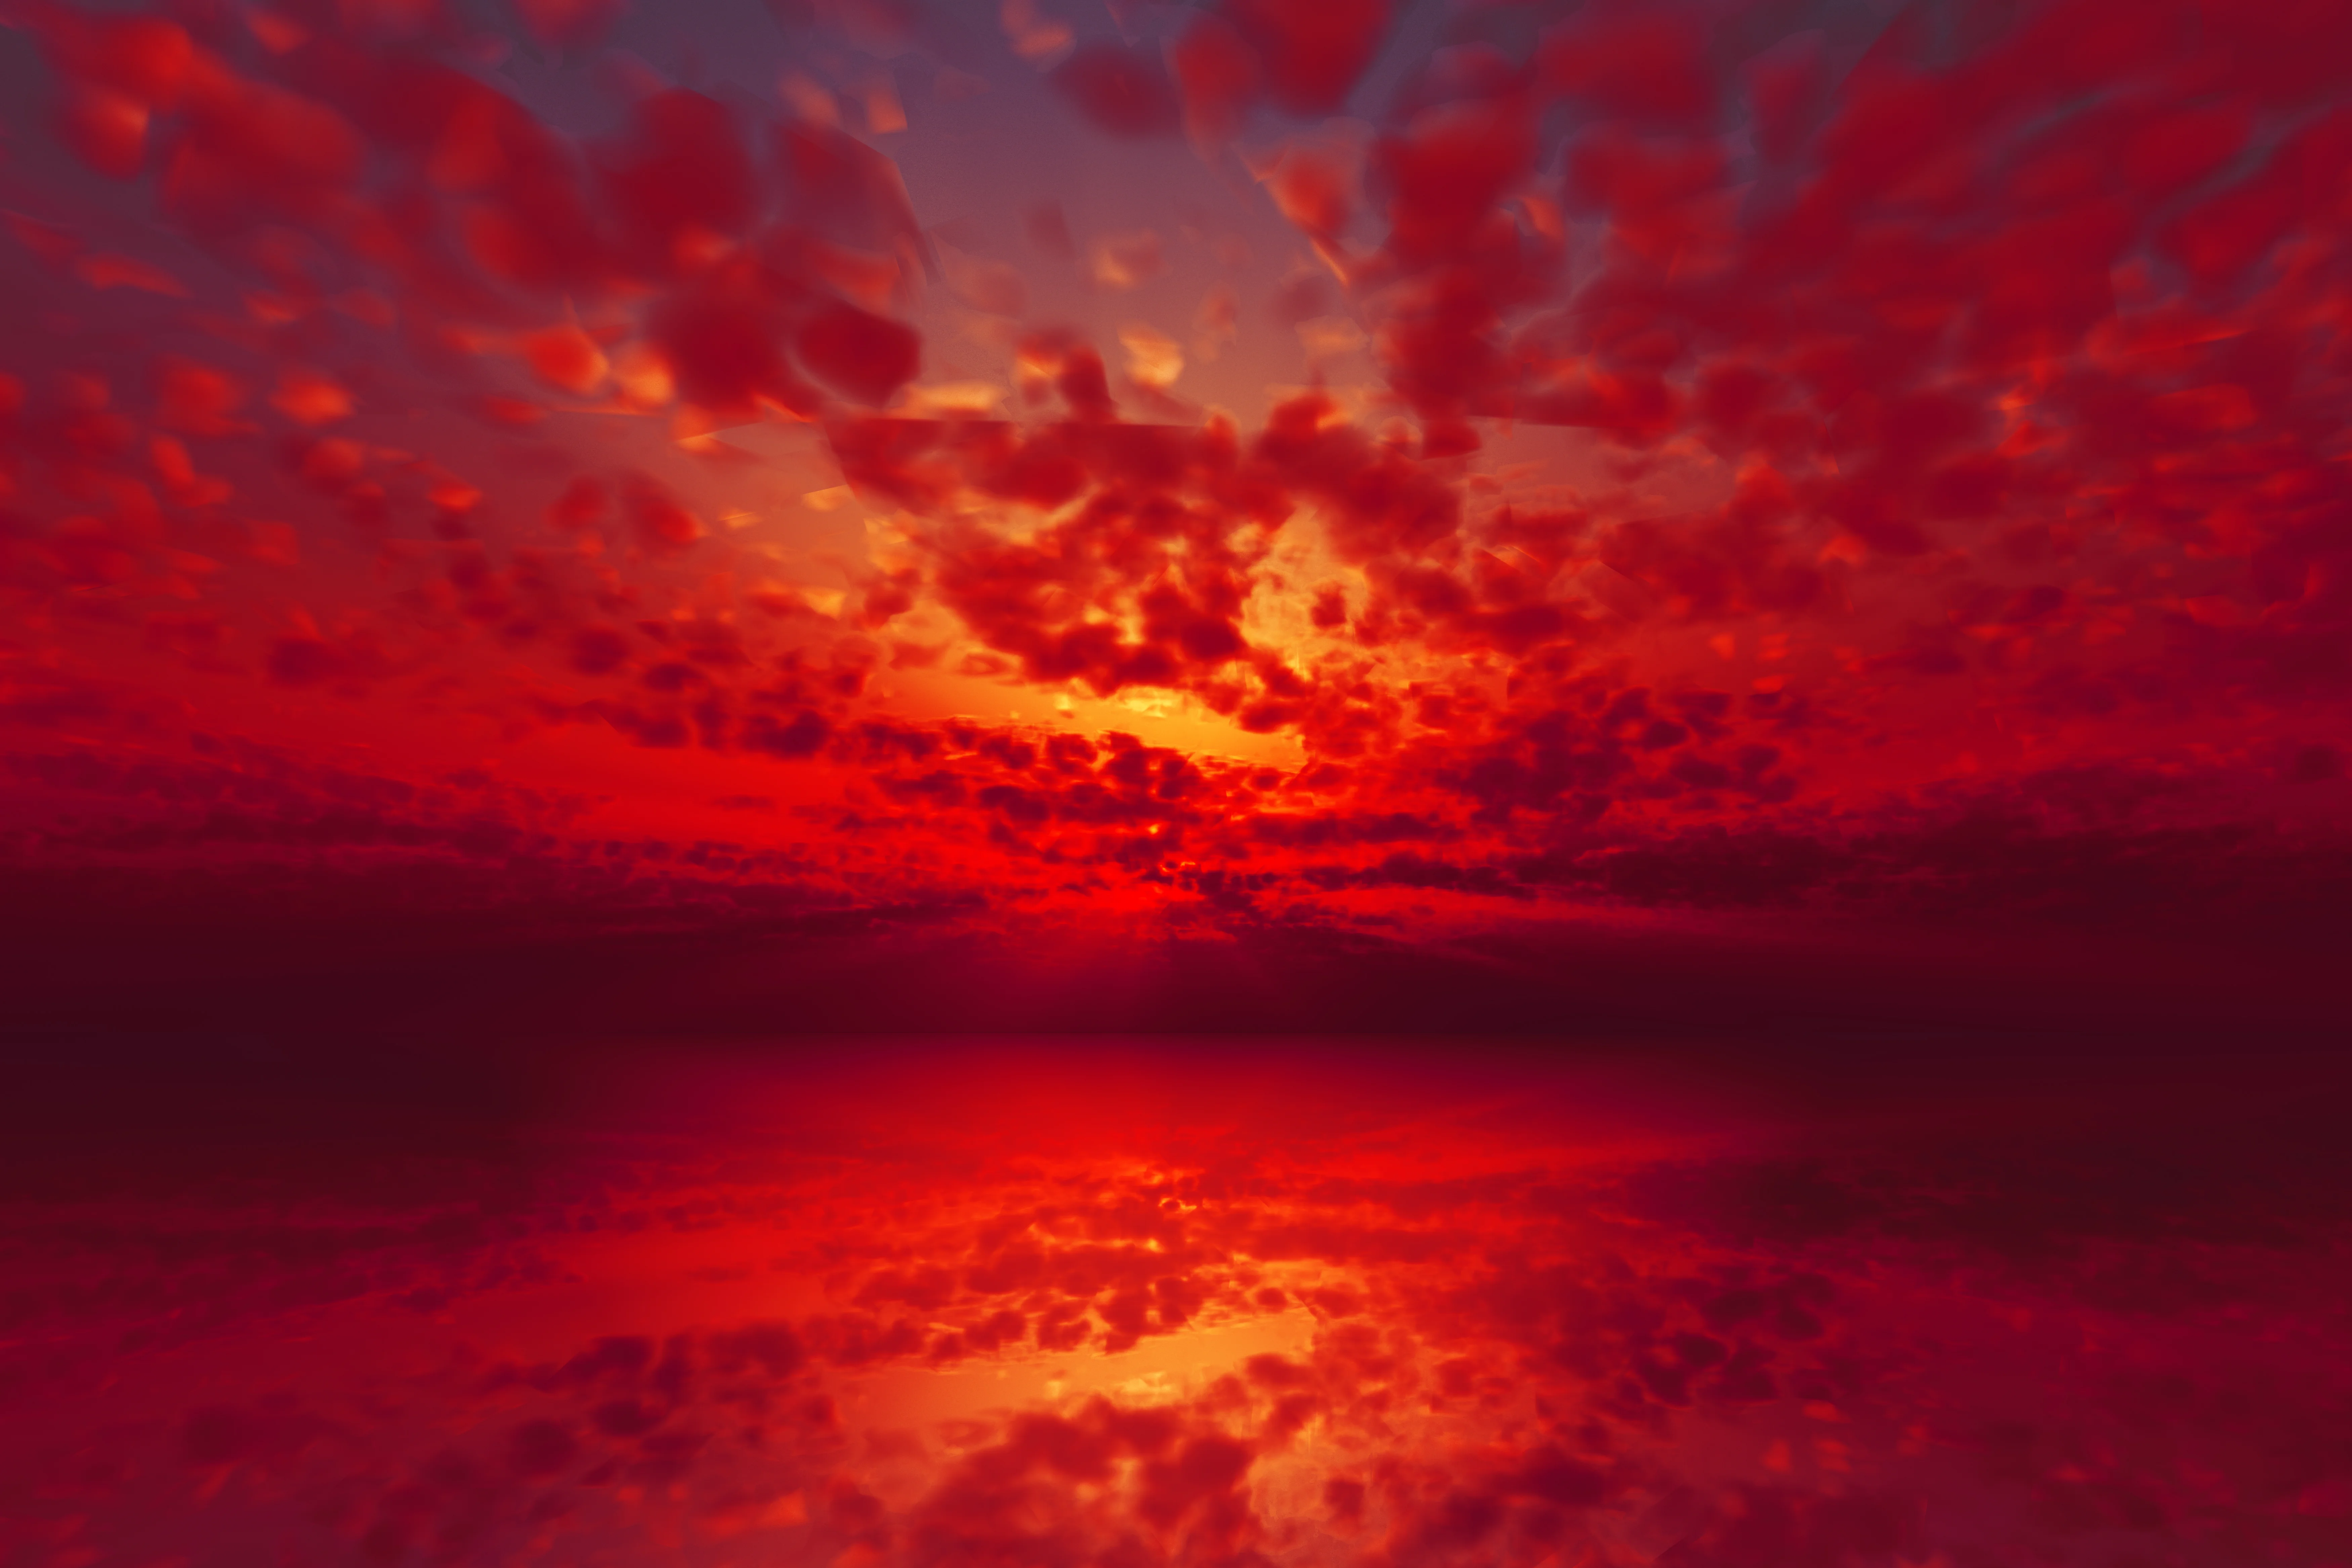 Fiery red and orange sunset with red clouds reflected in the water